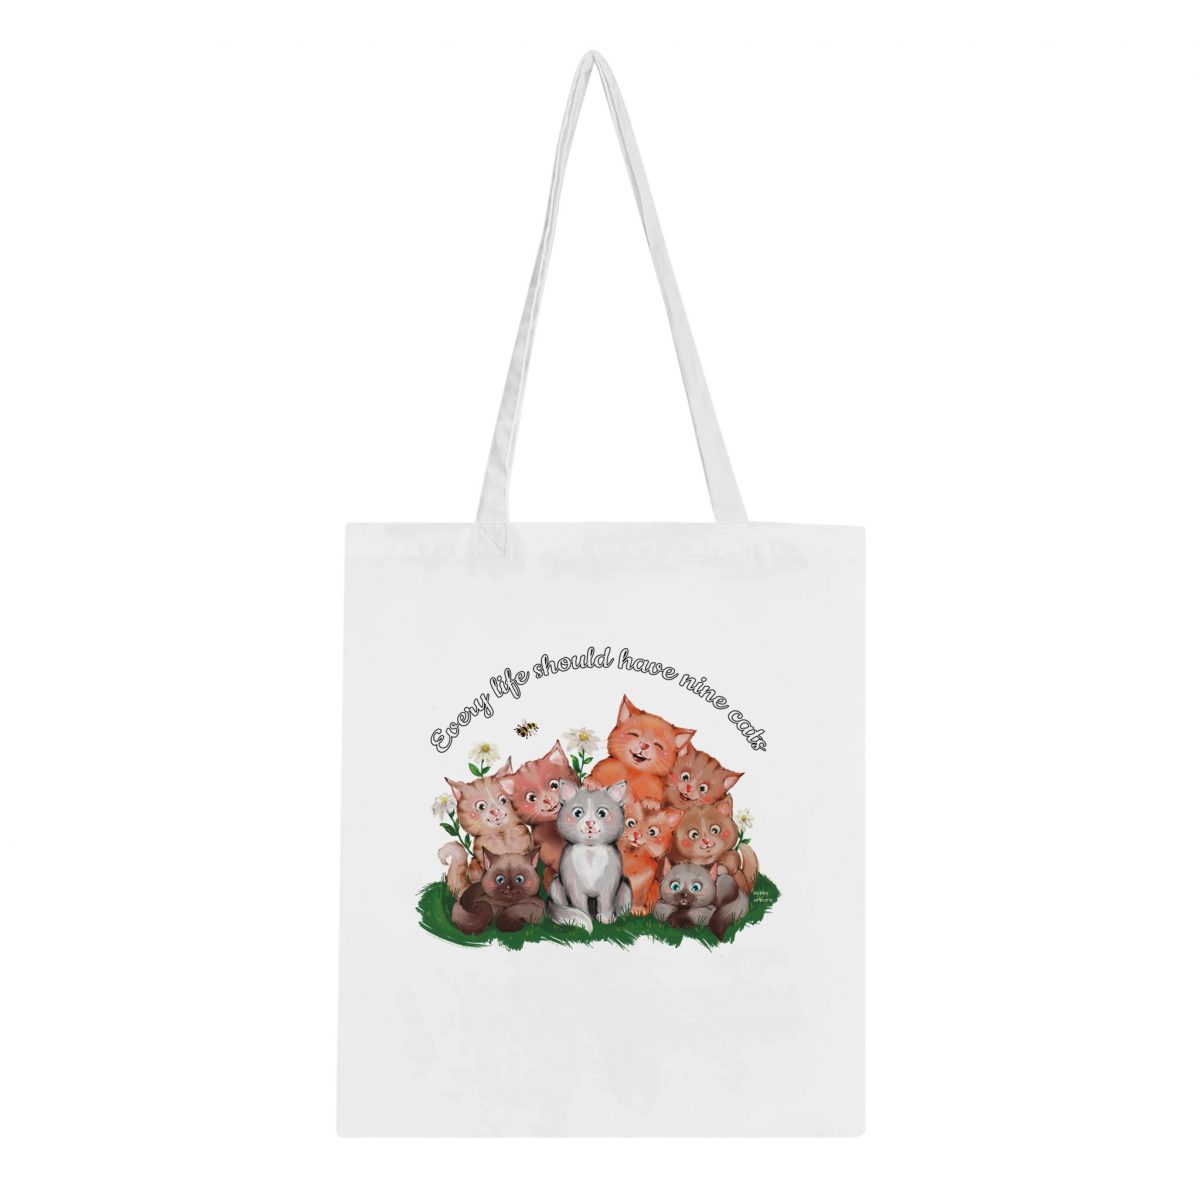 Every life should have nine cats Tote Bag